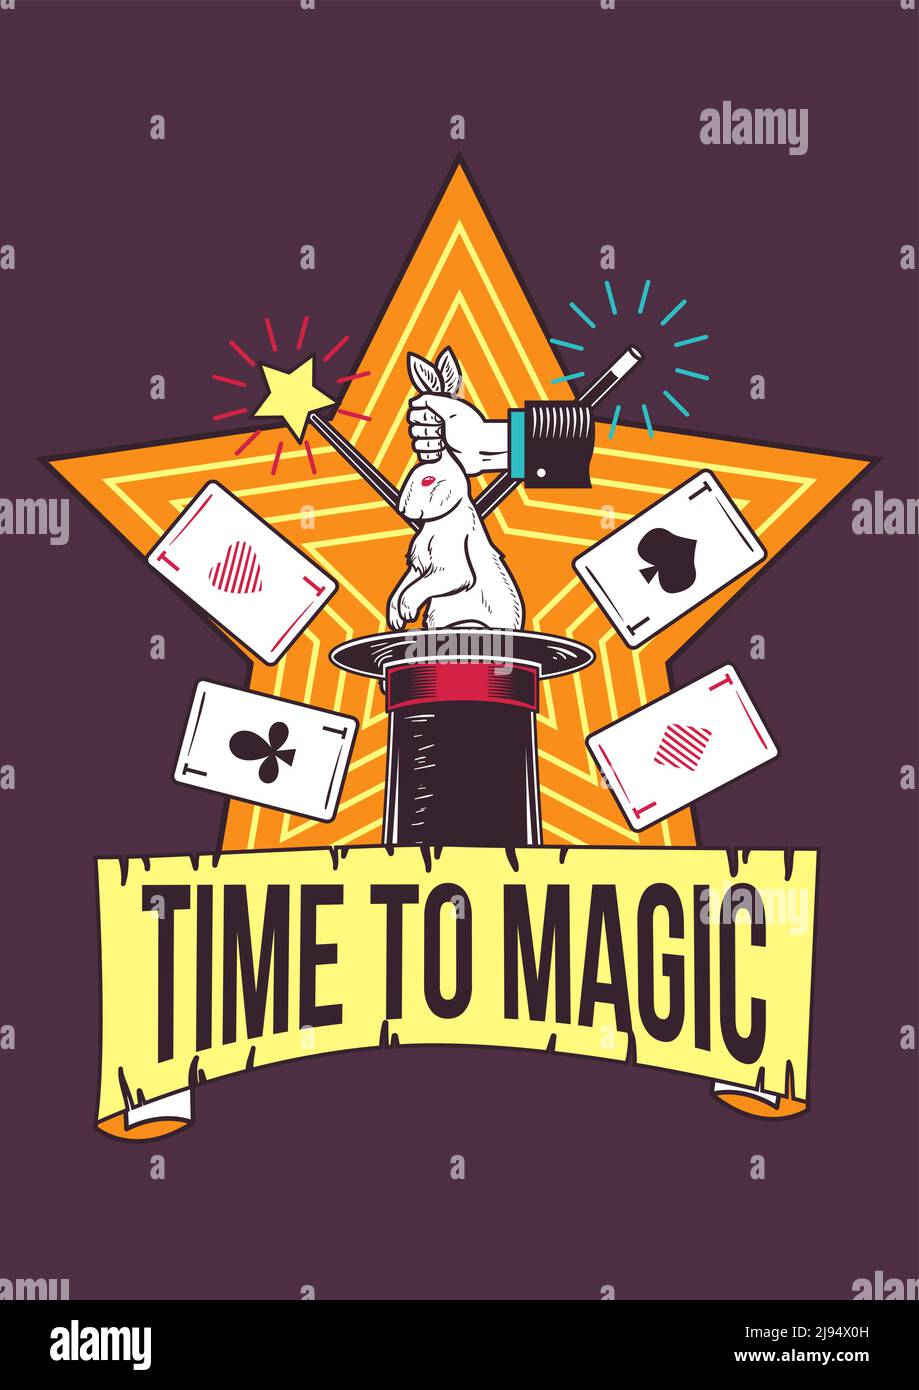 Poster design with illustration of magic tricks on background. Stock Vector